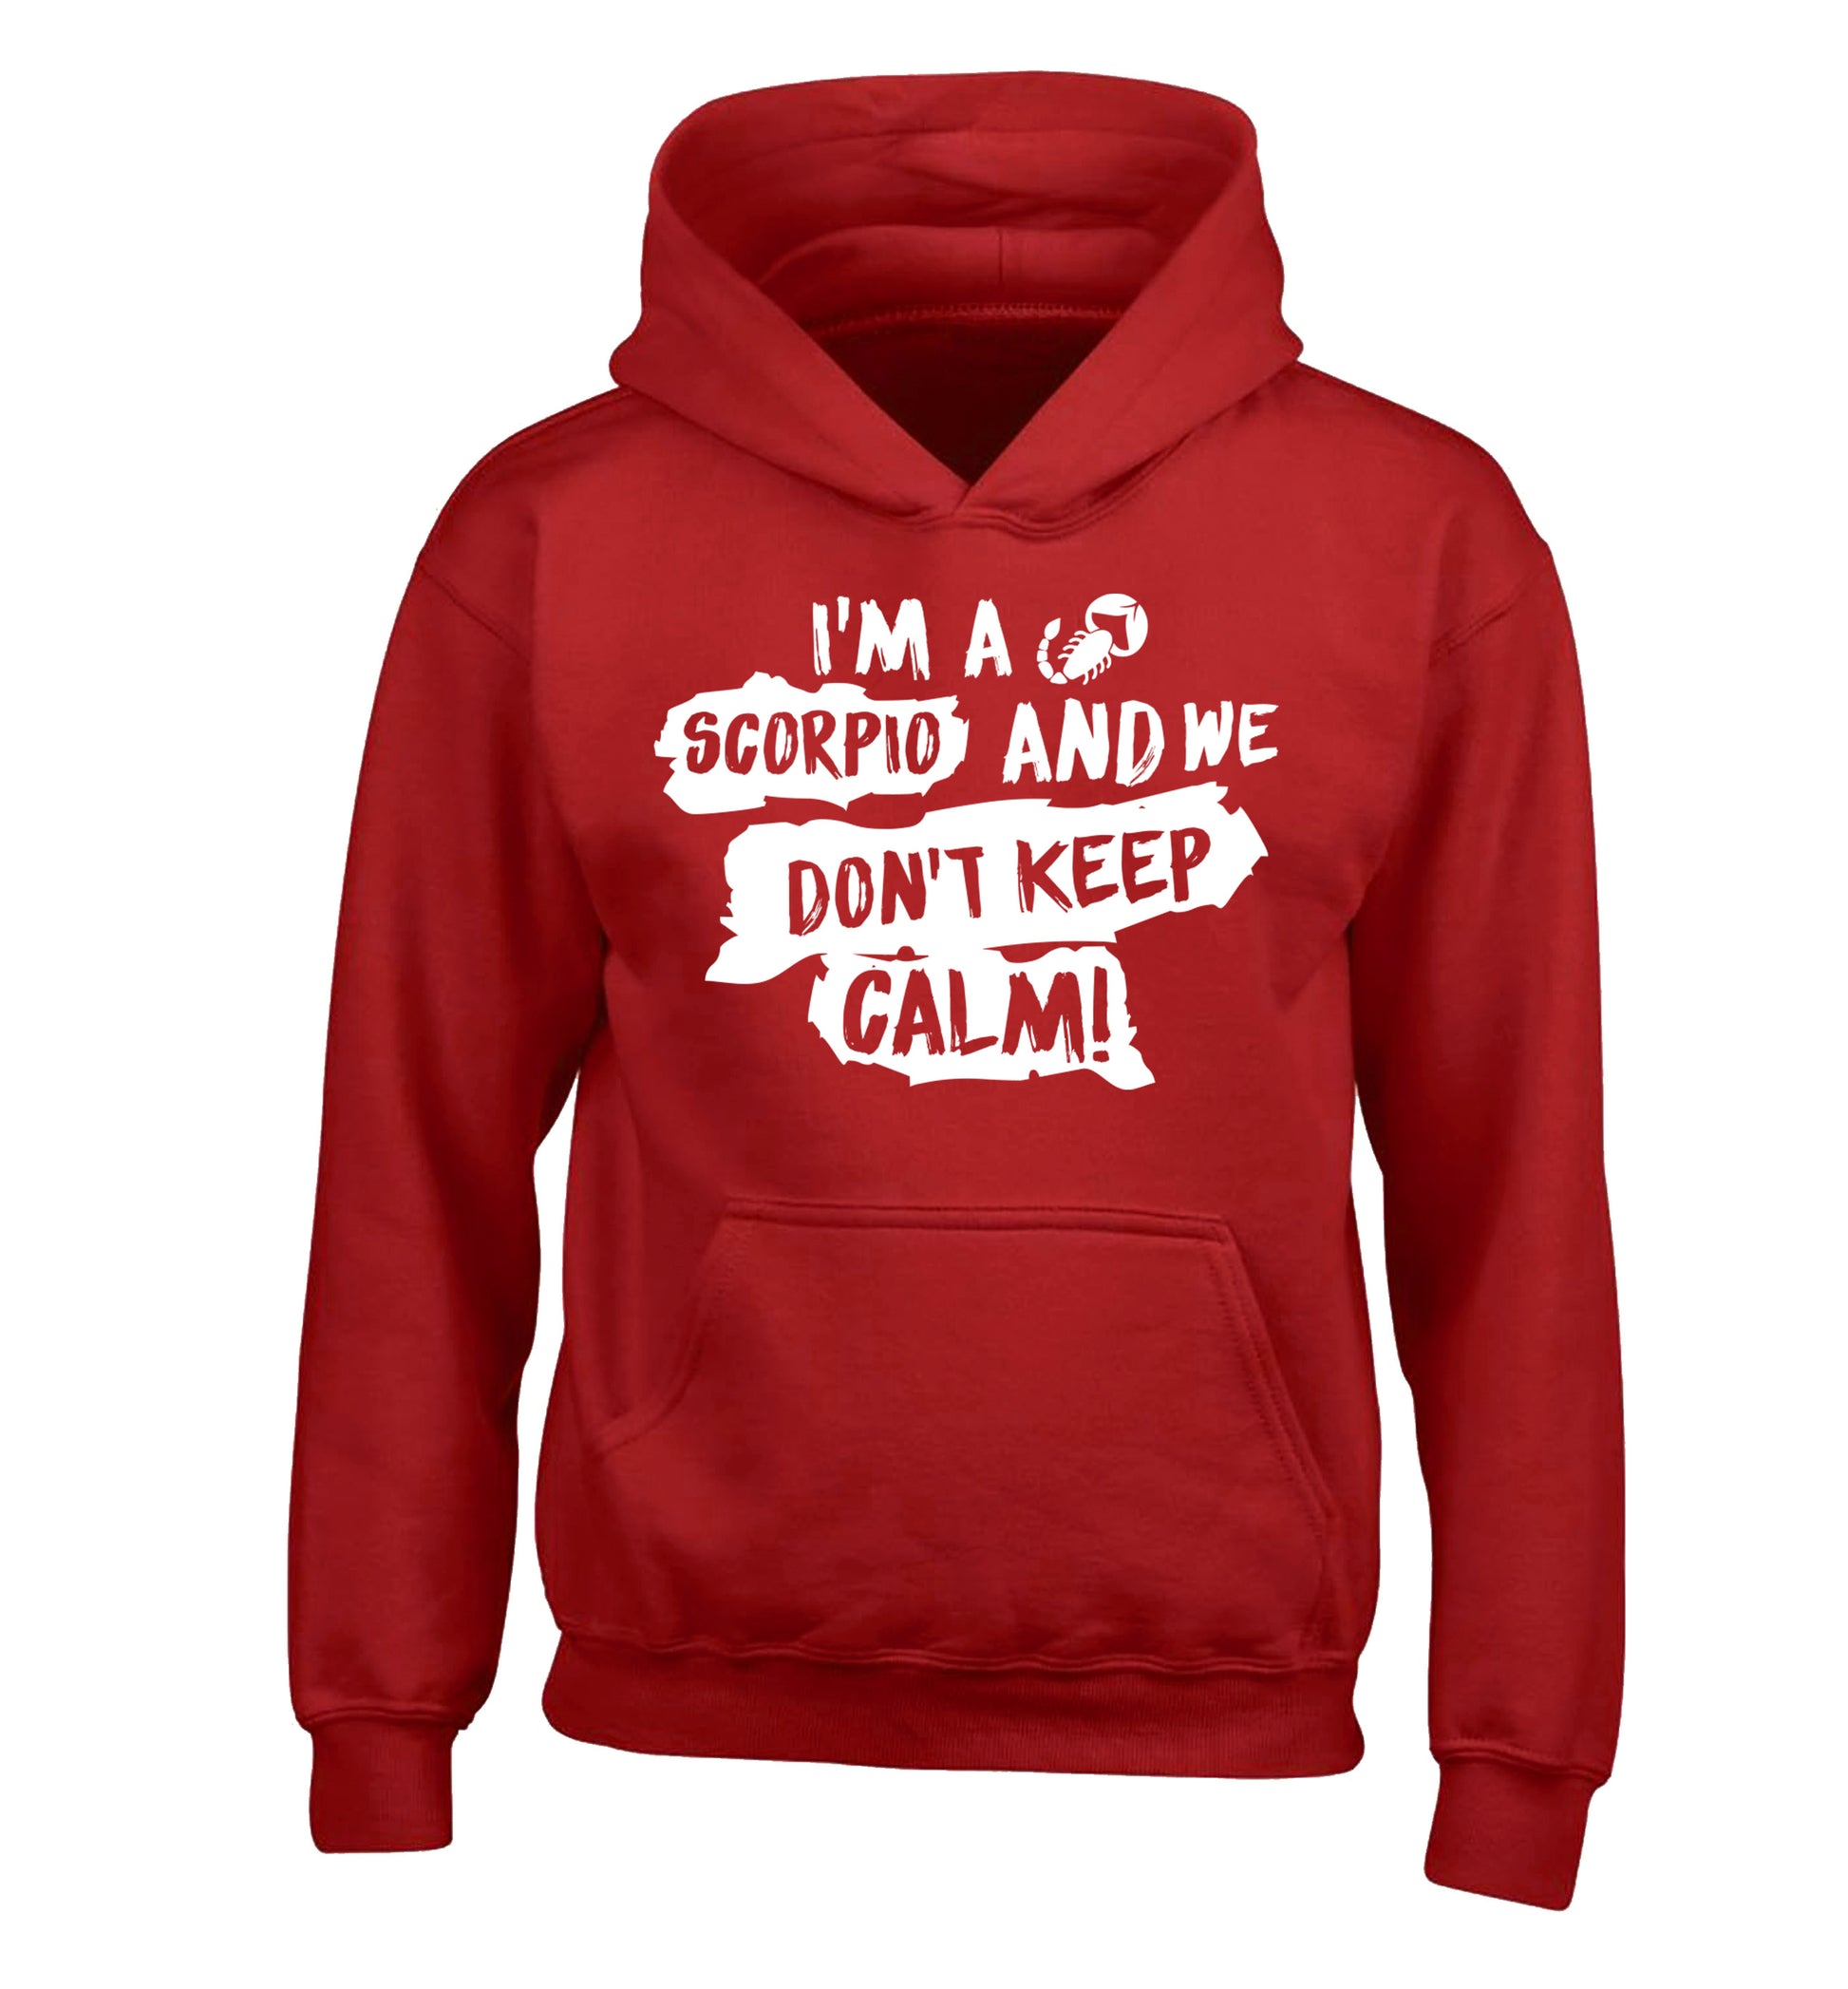 I'm a scorpio and we don't keep calm children's red hoodie 12-13 Years